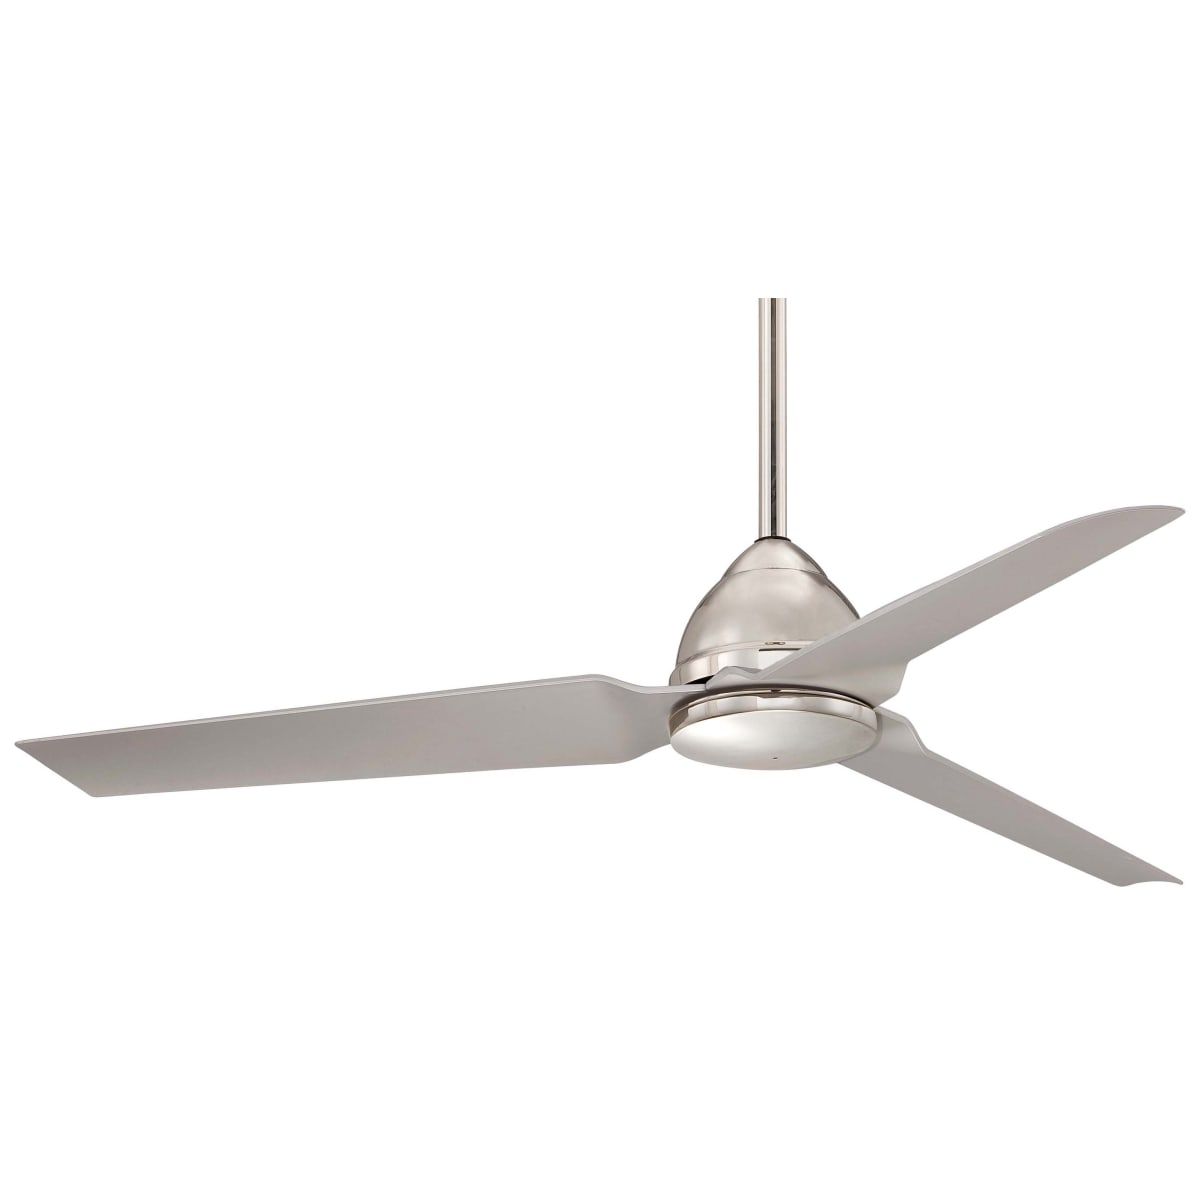 Java 3 Blade Outdoor Ceiling Fans For Well Known Minkaaire F753 Bnw Brushed Nickel Wet 3 Blade 54" Java (View 17 of 20)